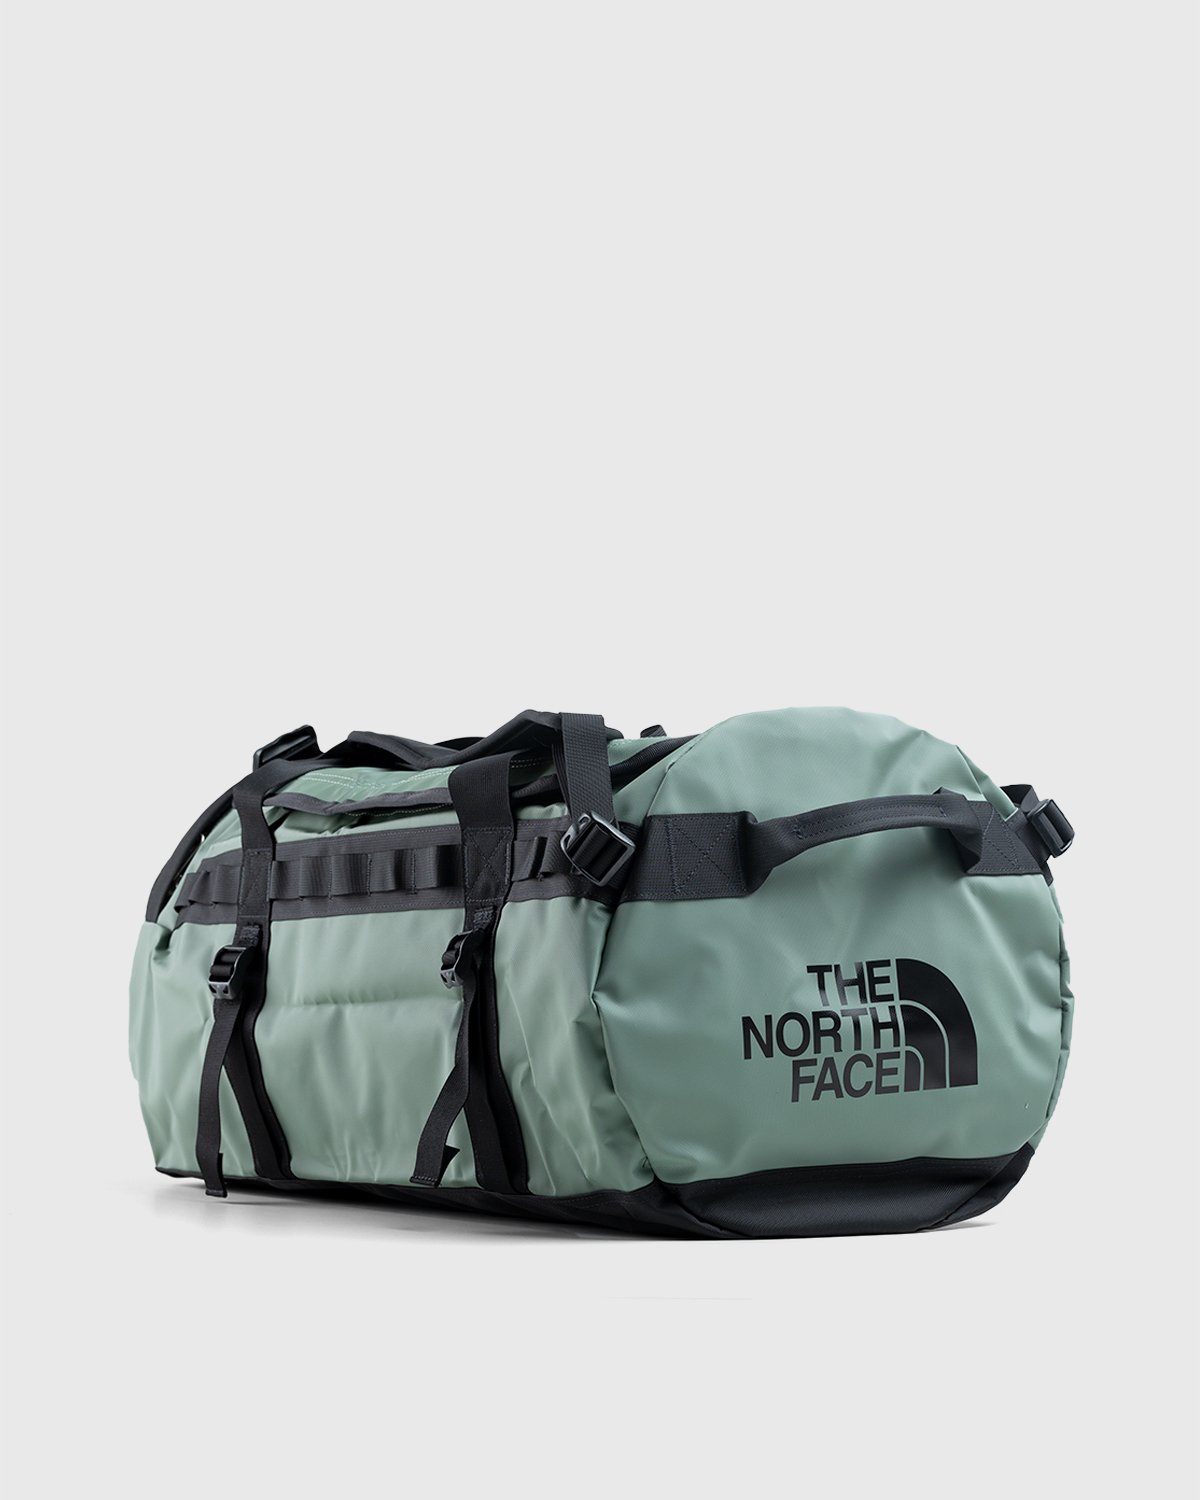 The North Face - Medium Base Camp Duffel - Accessories - Green - Image 1